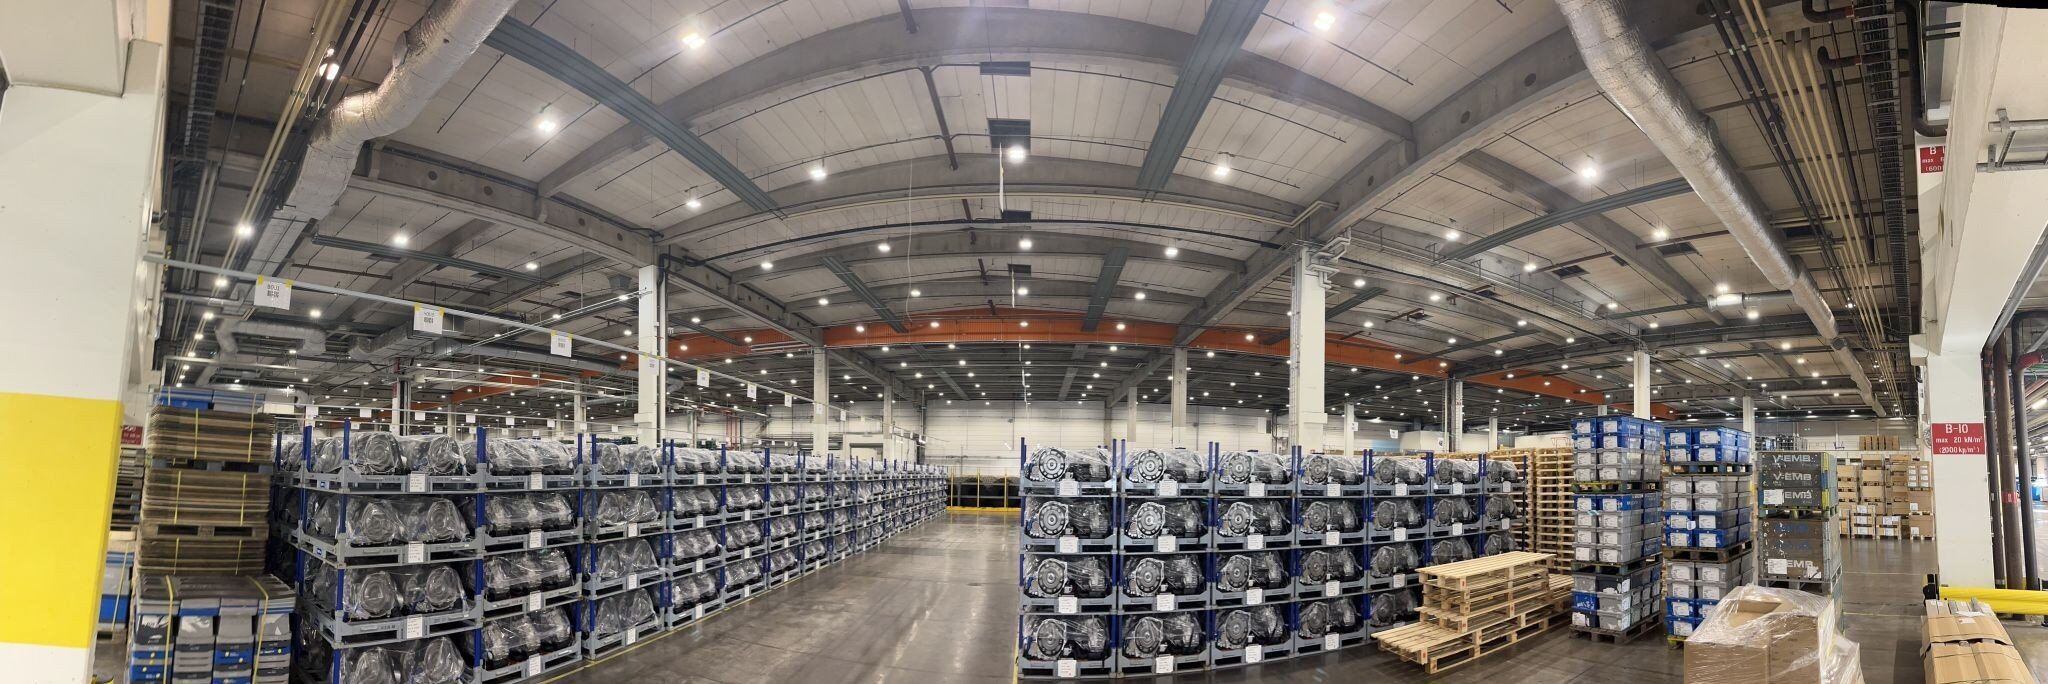 led high bay lights in the logistic warehouse